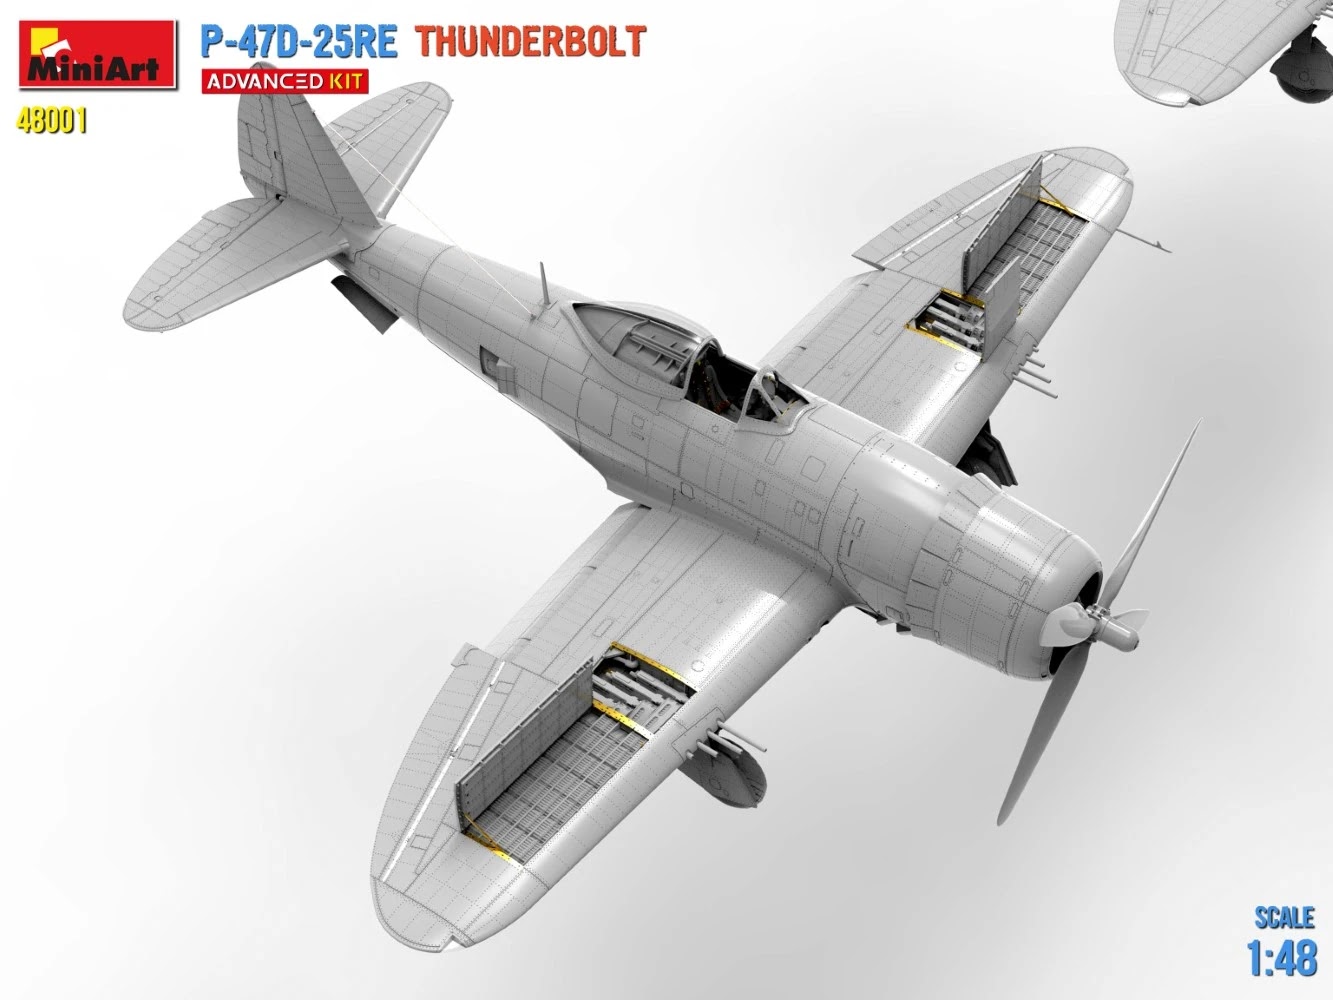 MiniArt ups the detail on their P-47D CAD-3